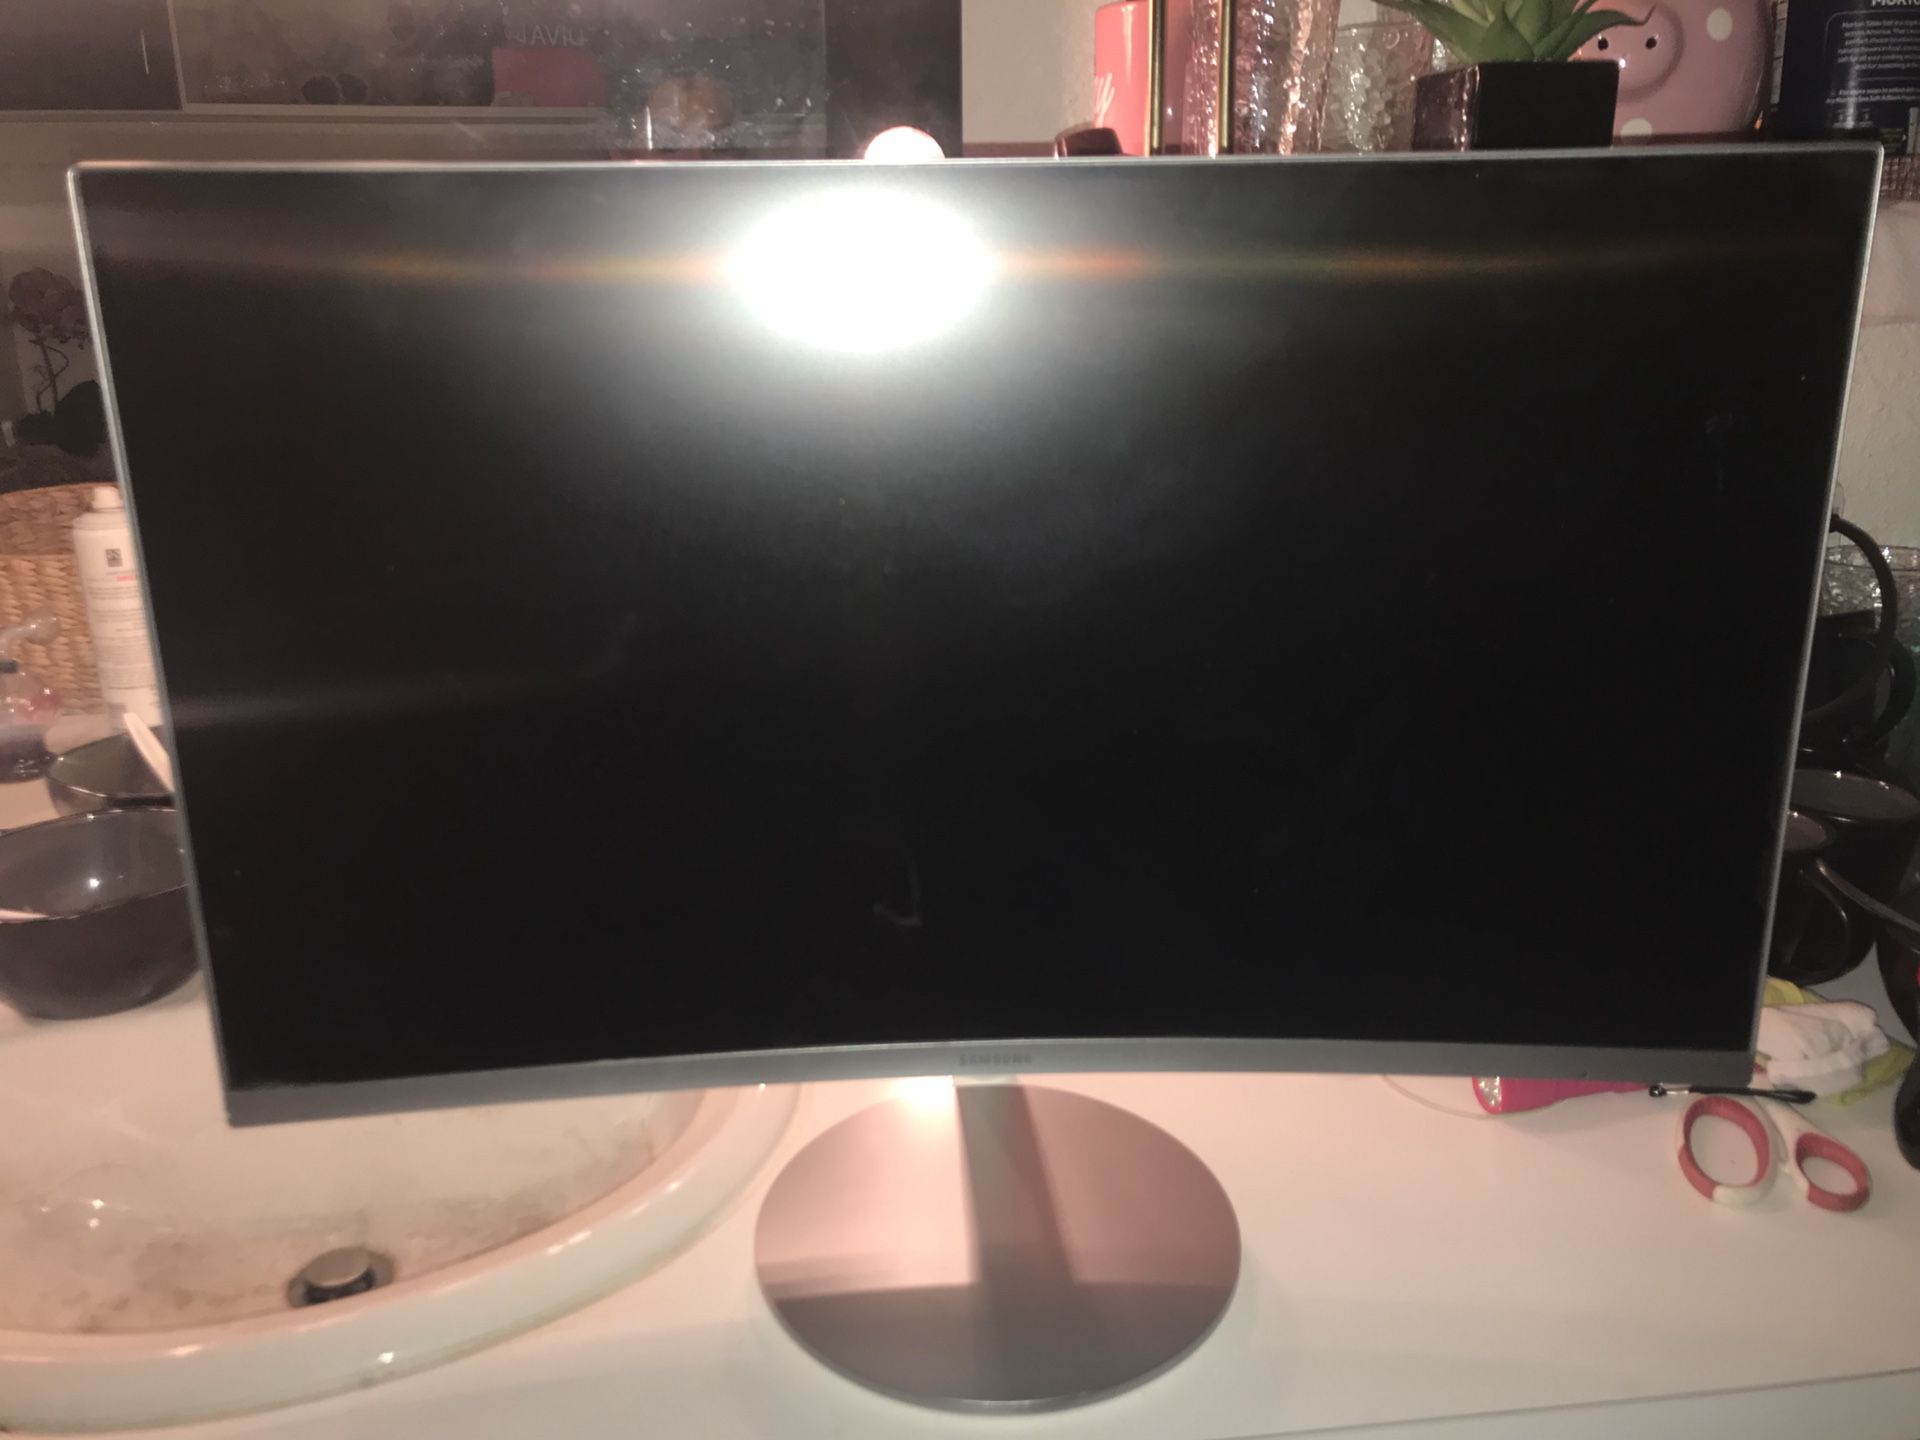 Samsung monitor *New* never used